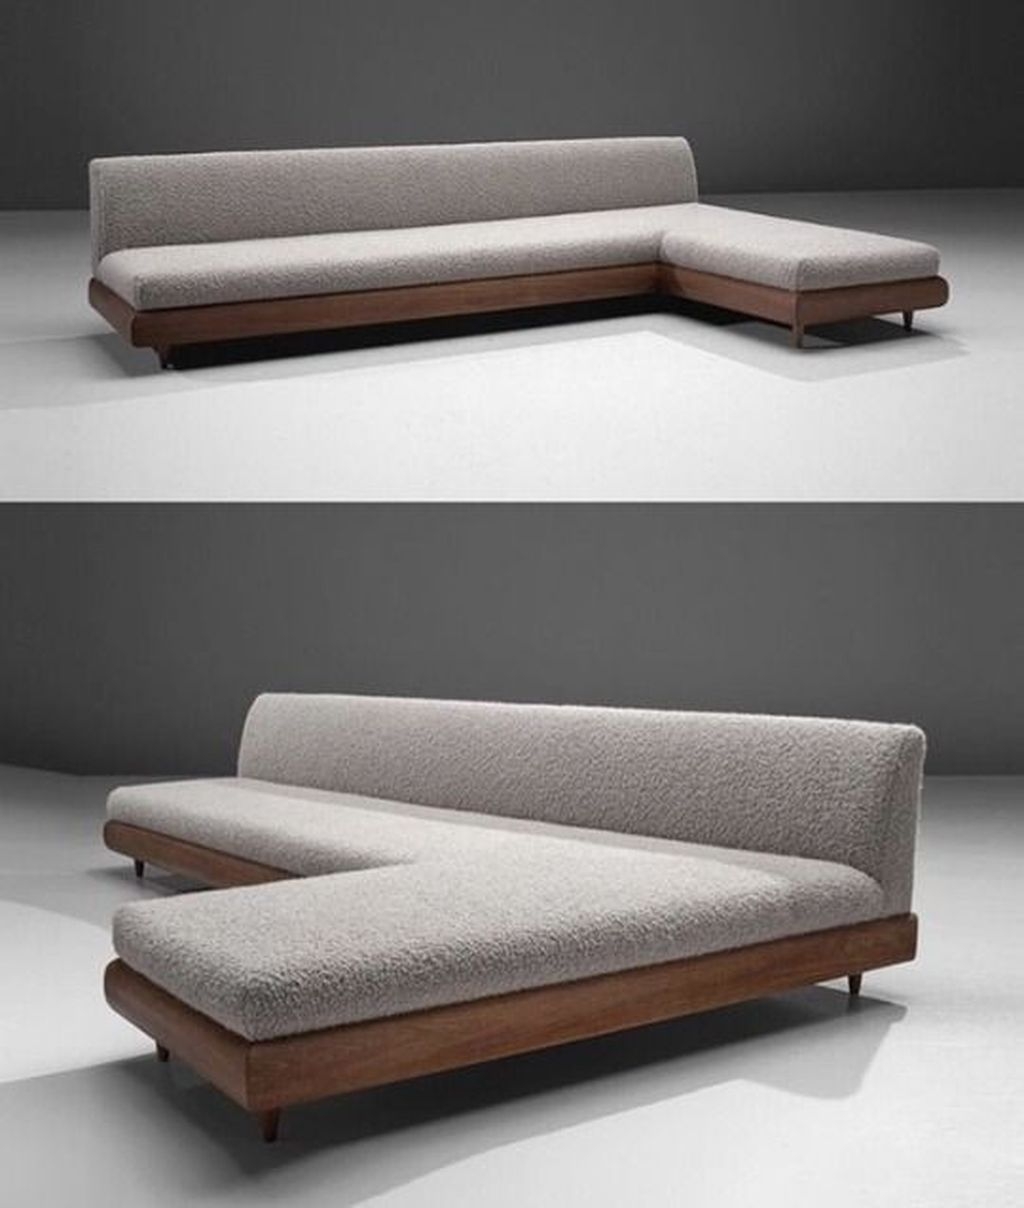 Modern And Minimalist Sofa For Your Living Room29